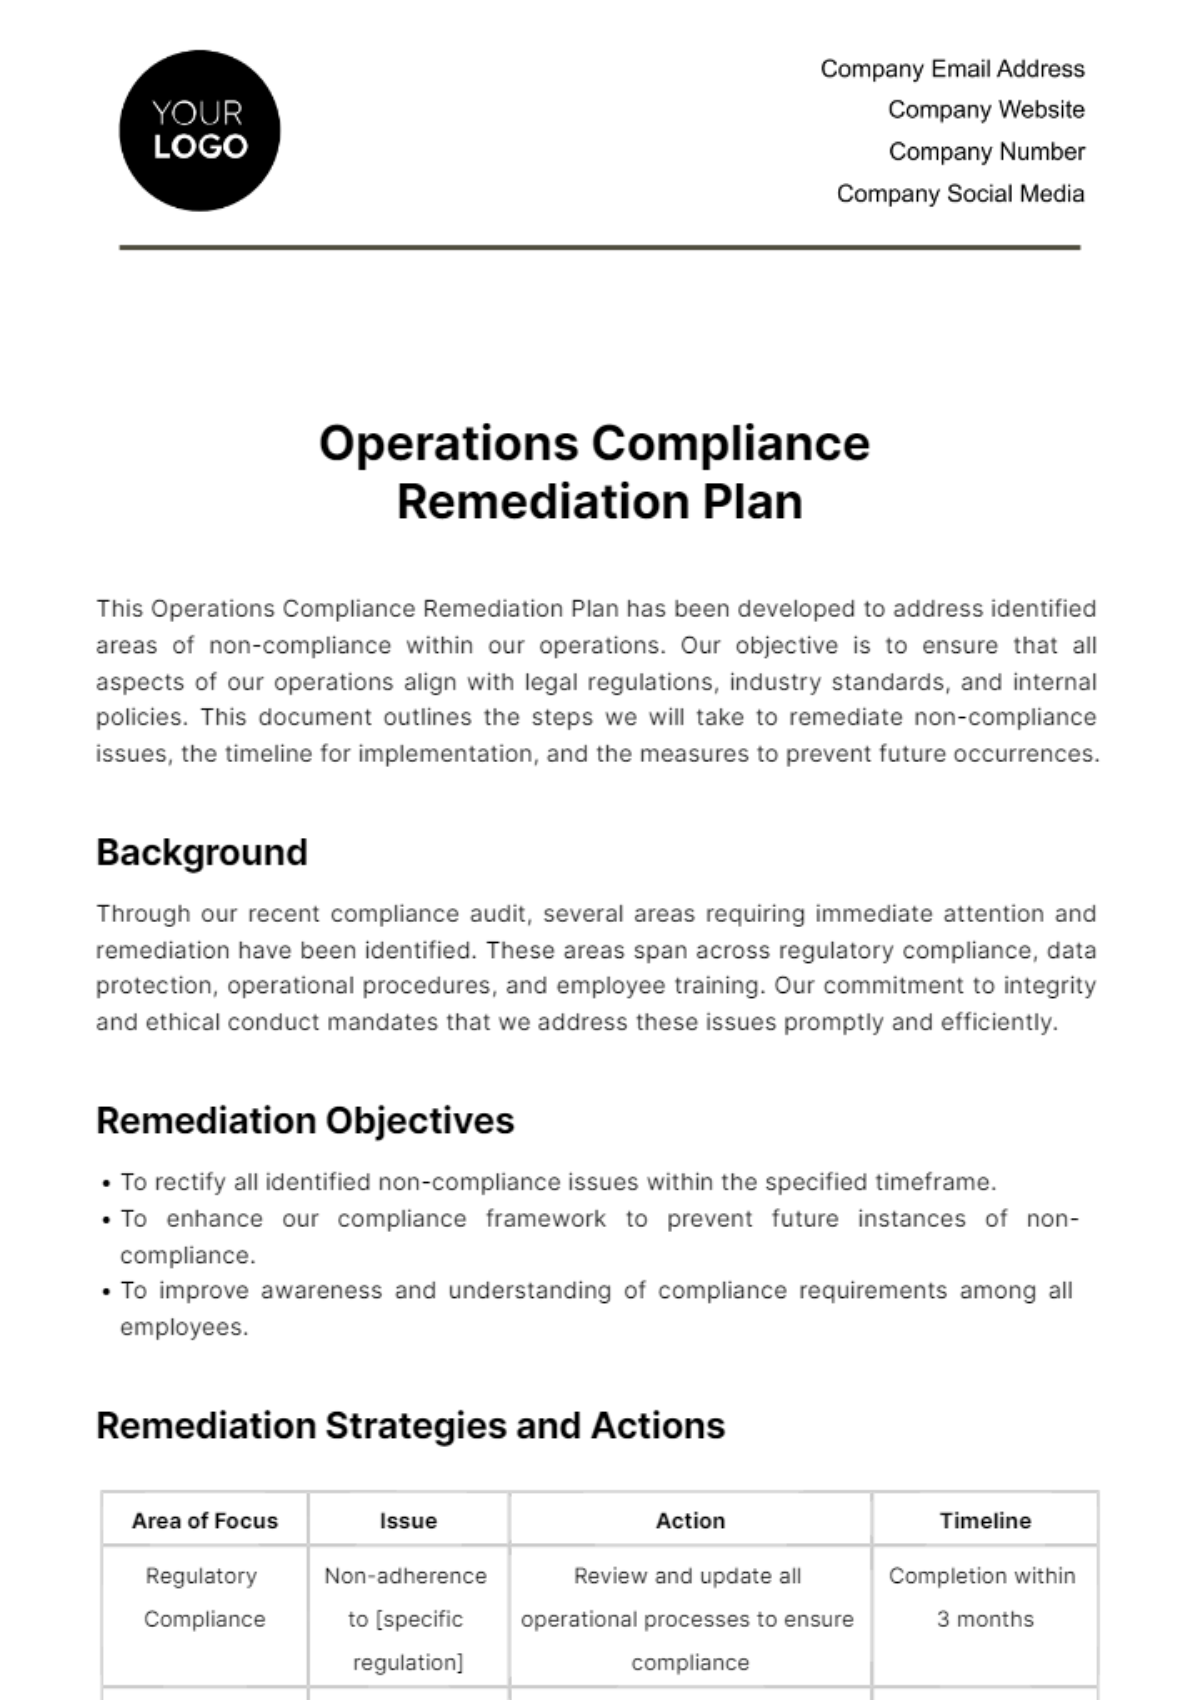 Operations Compliance Remediation Plan Template